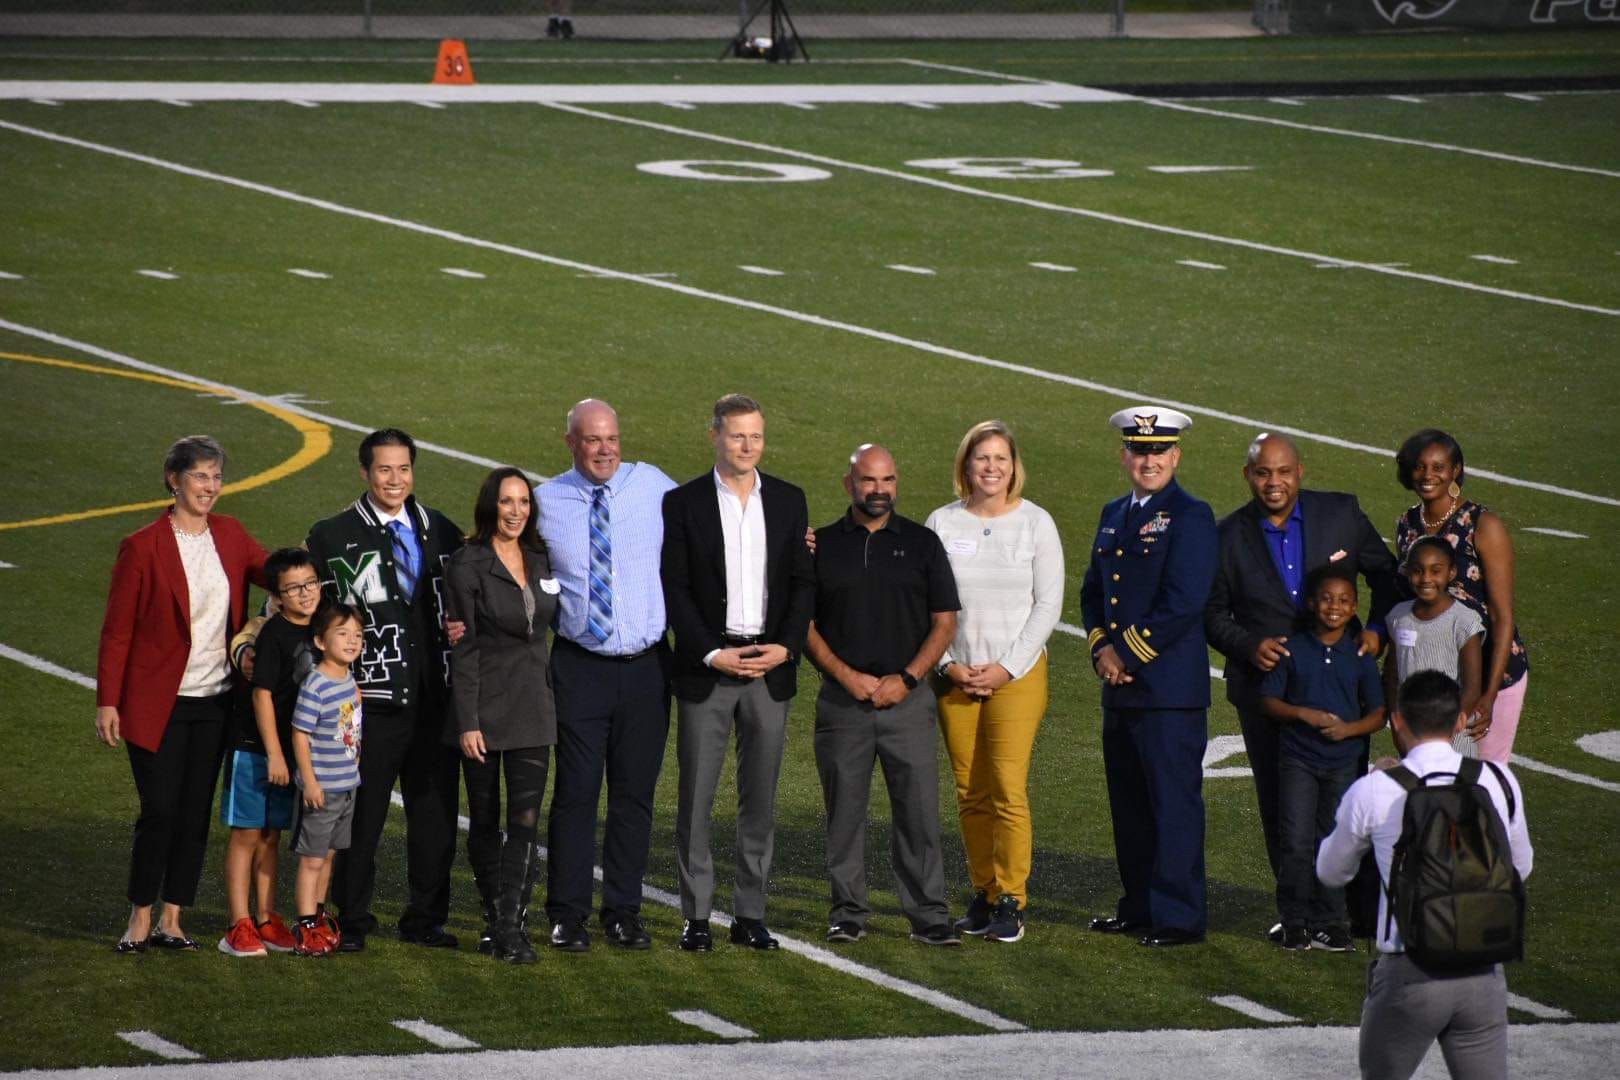 Abdullah and his family on a football field receiving an award alongside other families. 